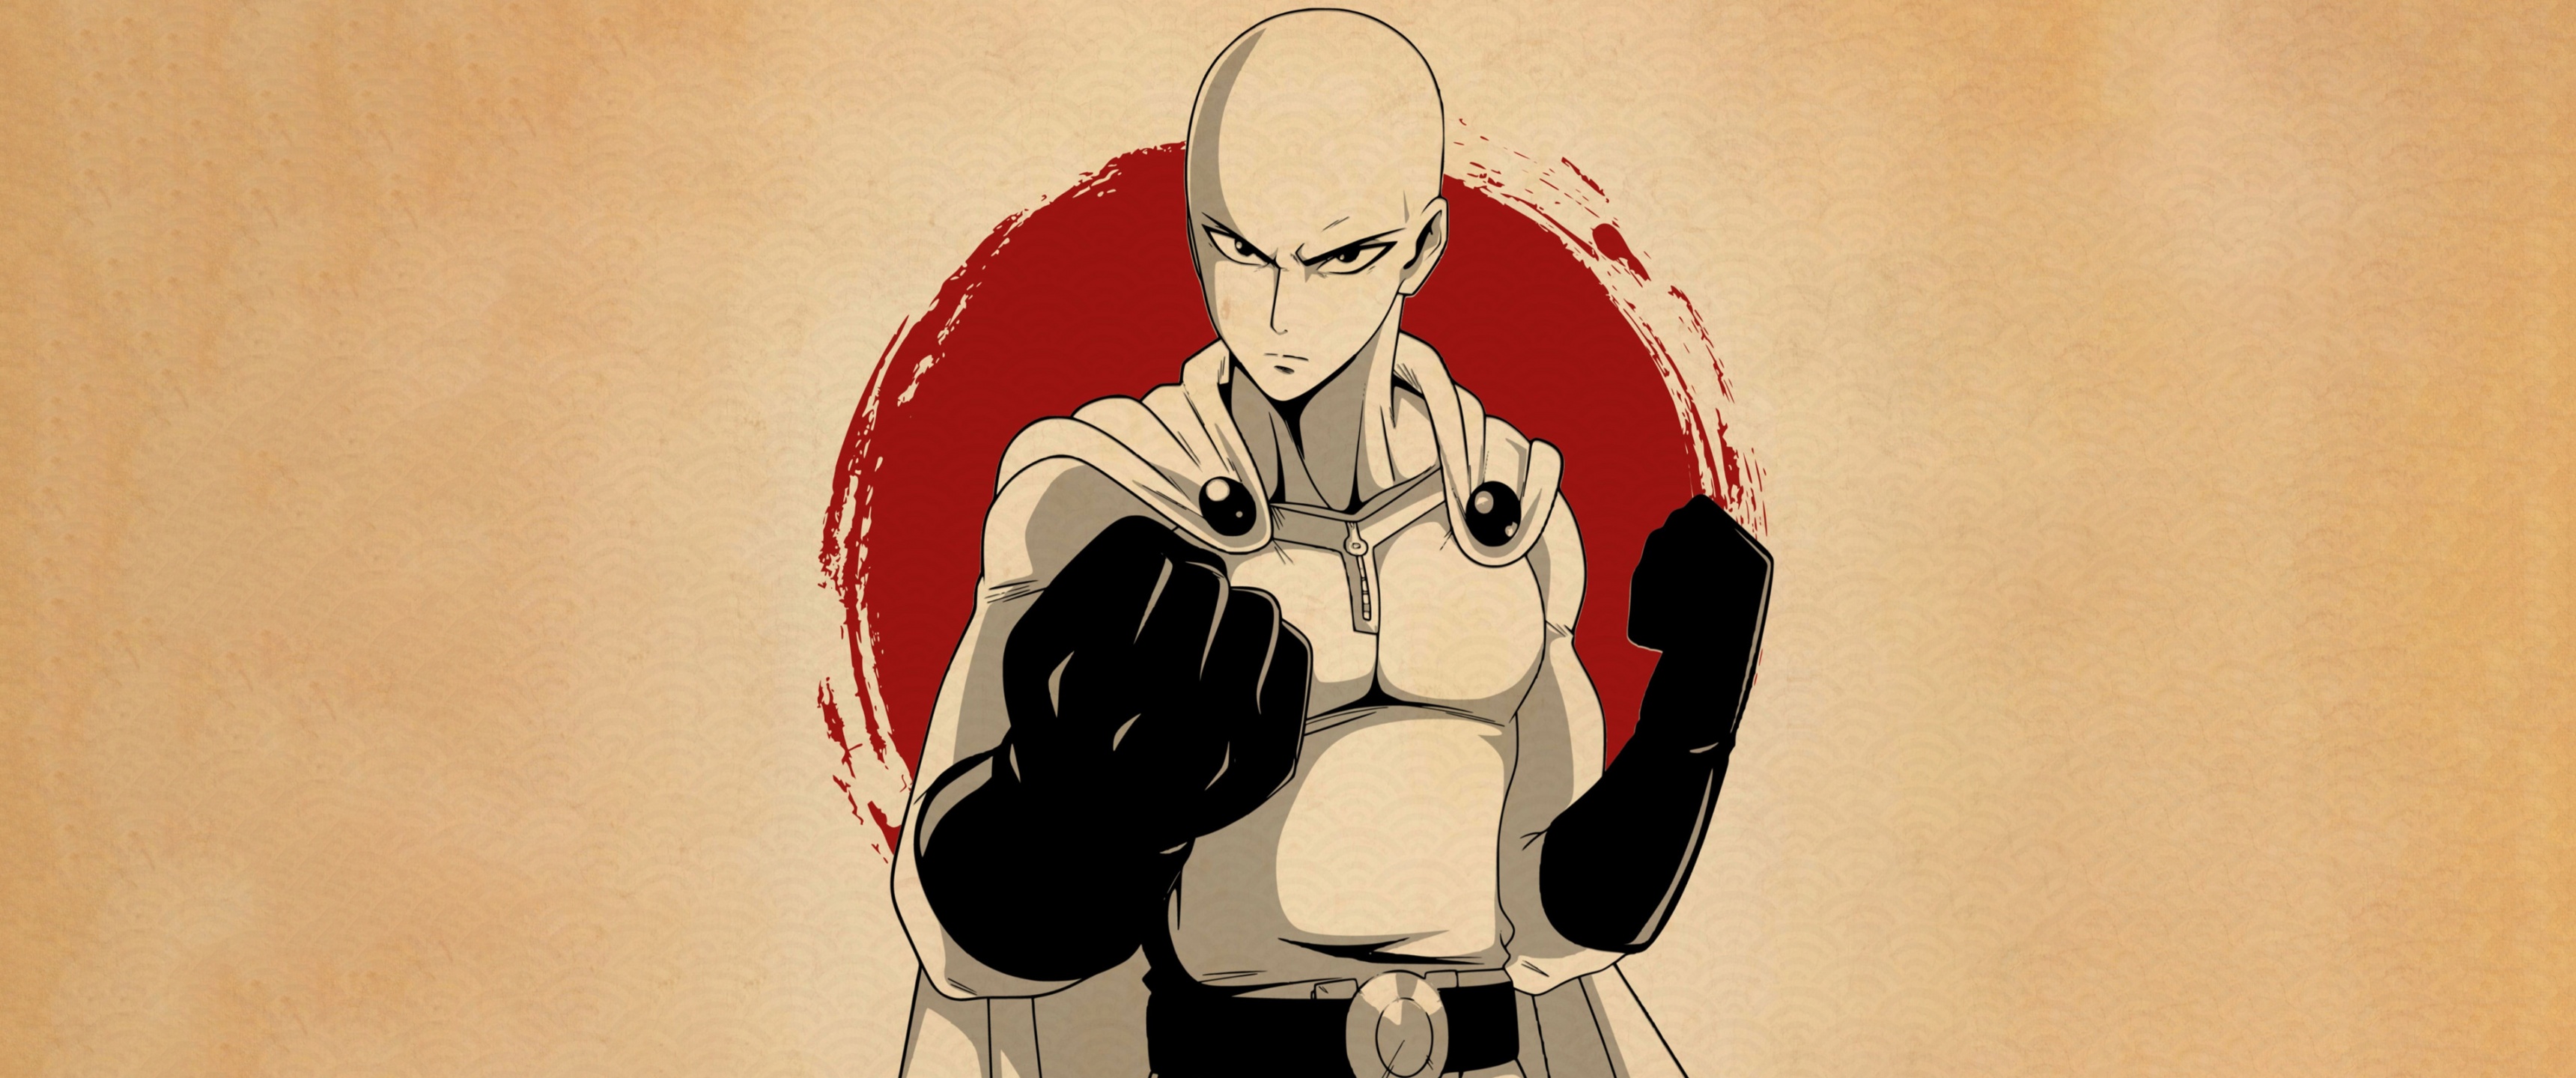 One Punch Man 4k PC Wallpapers - Wallpaper Cave